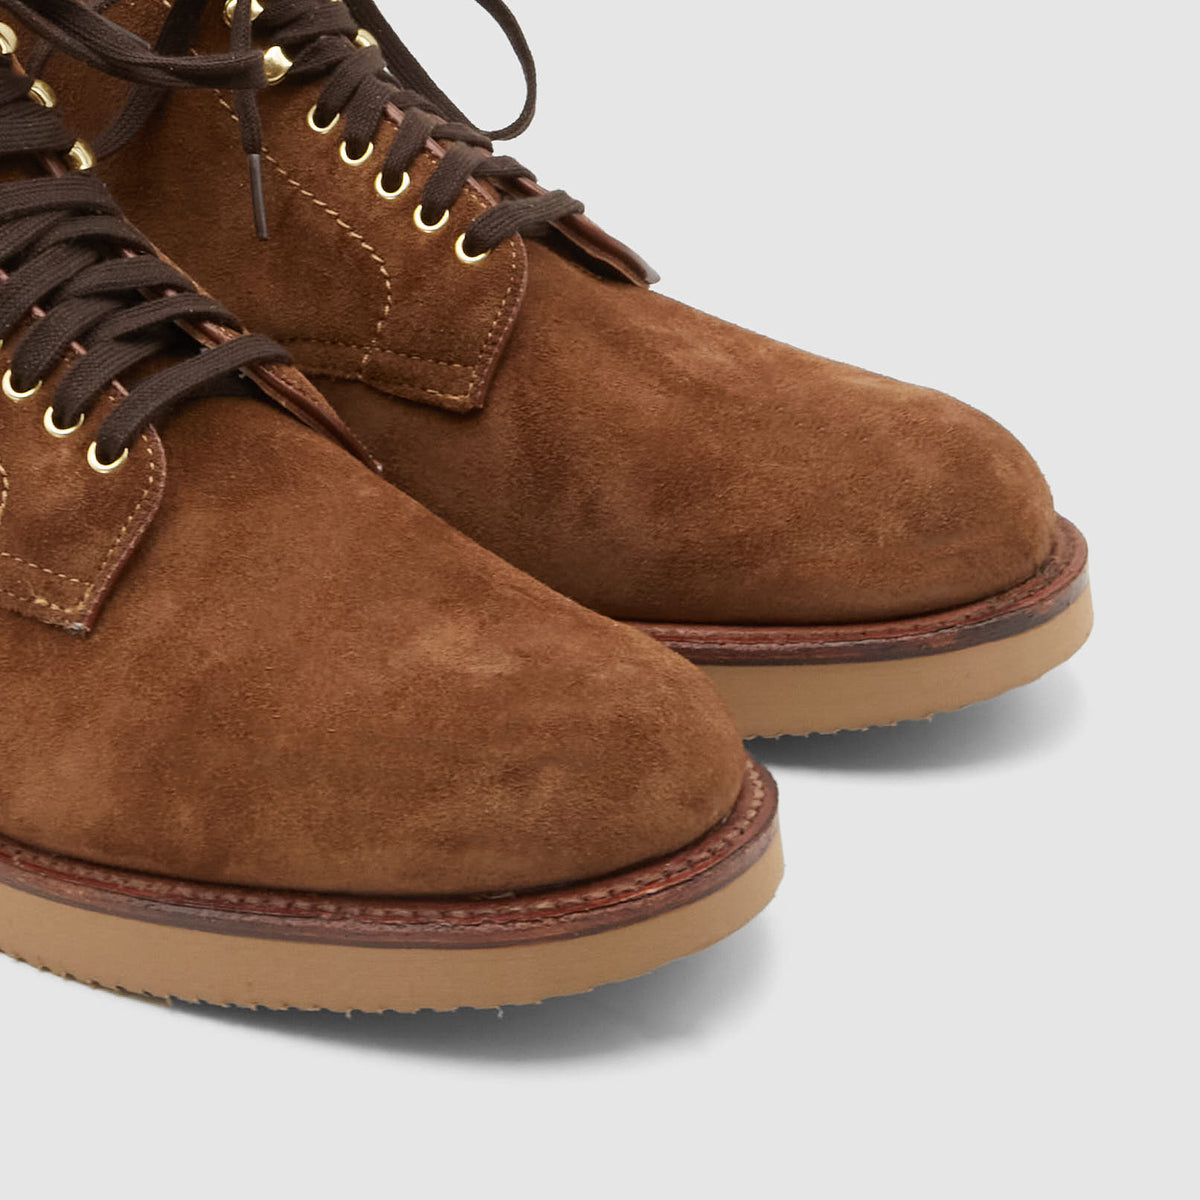 Alden Snuff Suede Lined Lace Up Boot